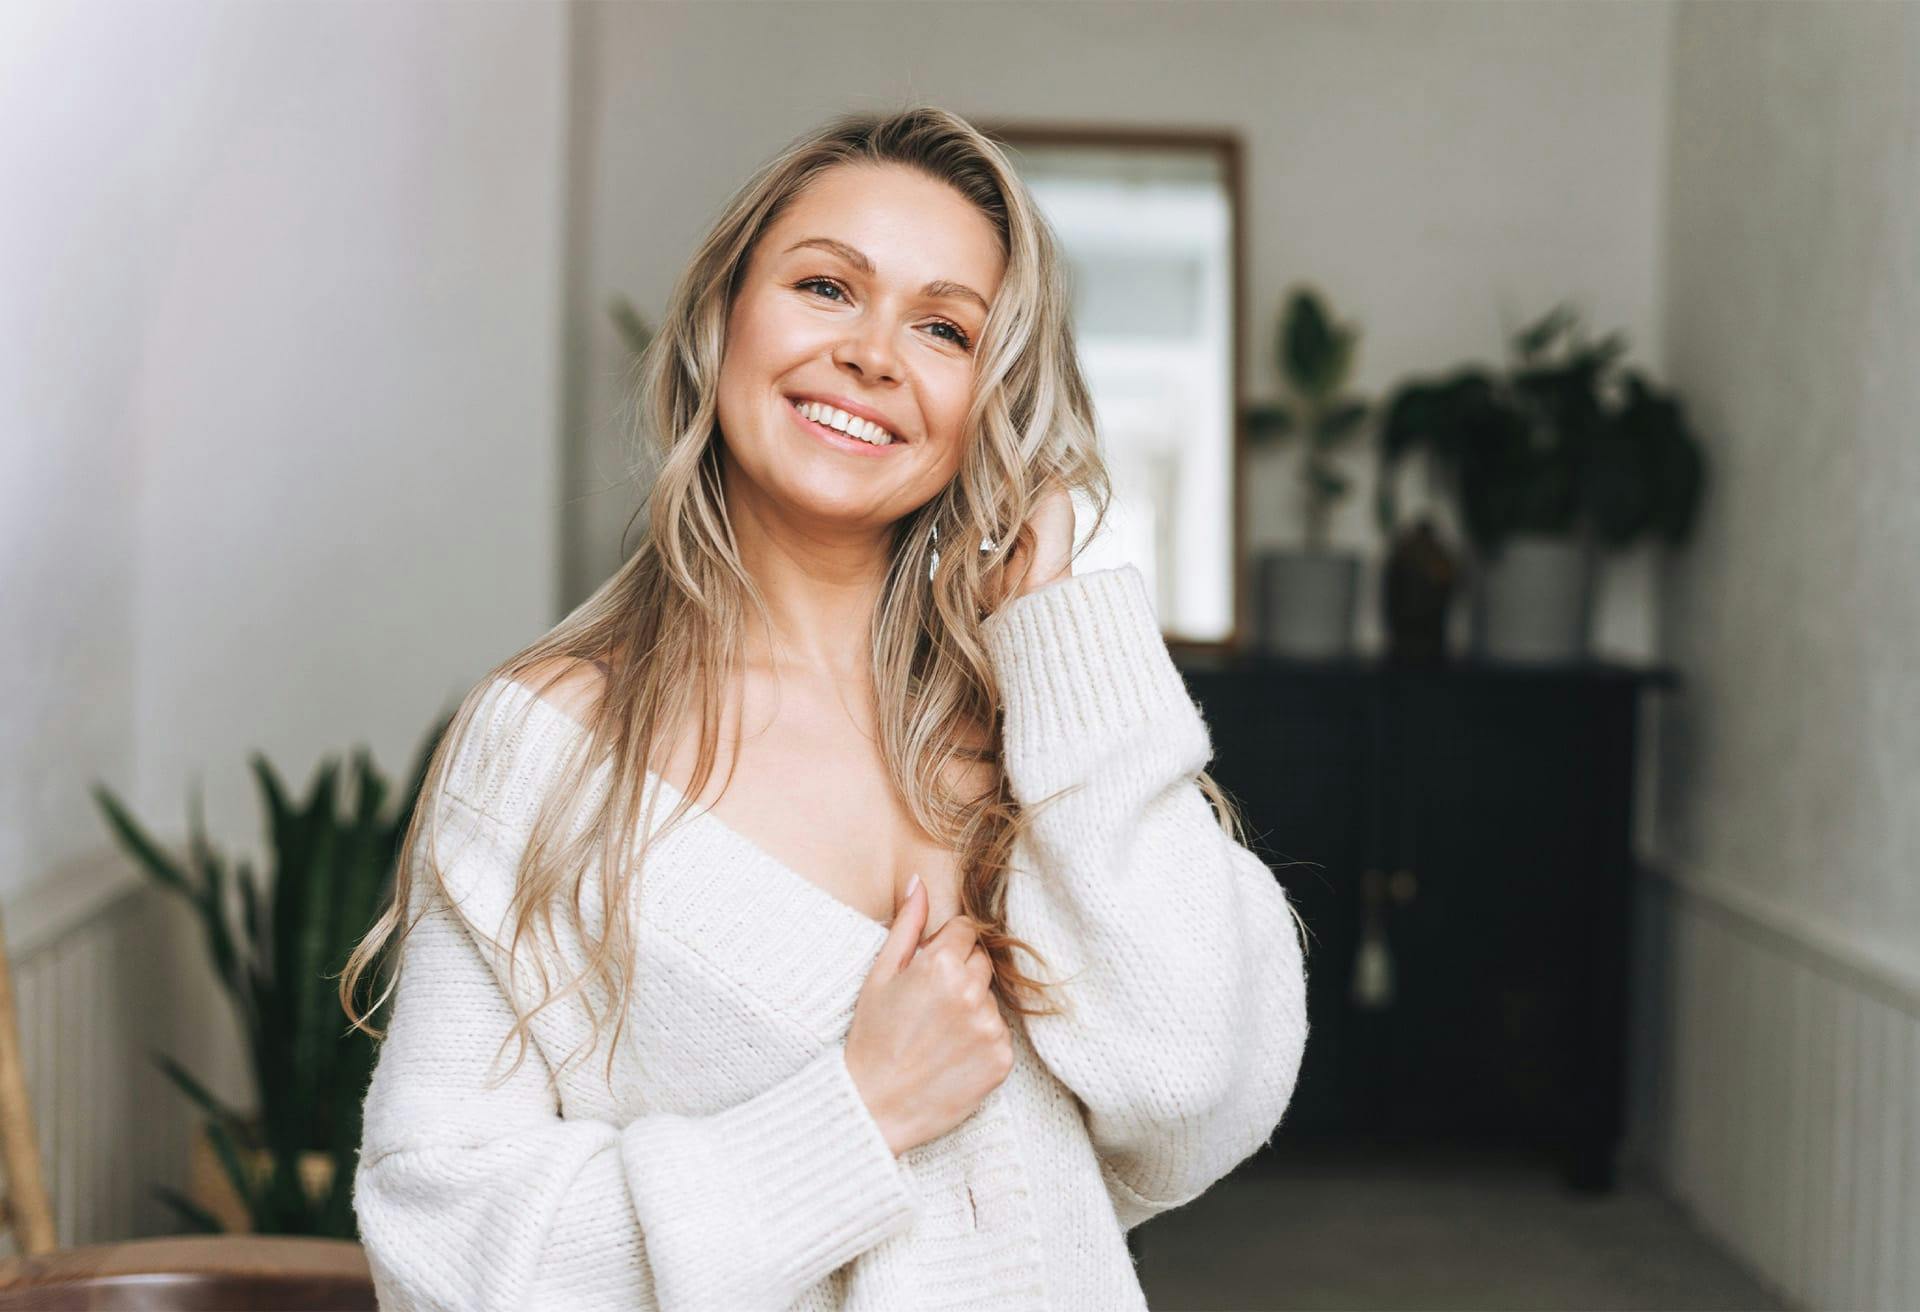 Woman in white sweater smiling